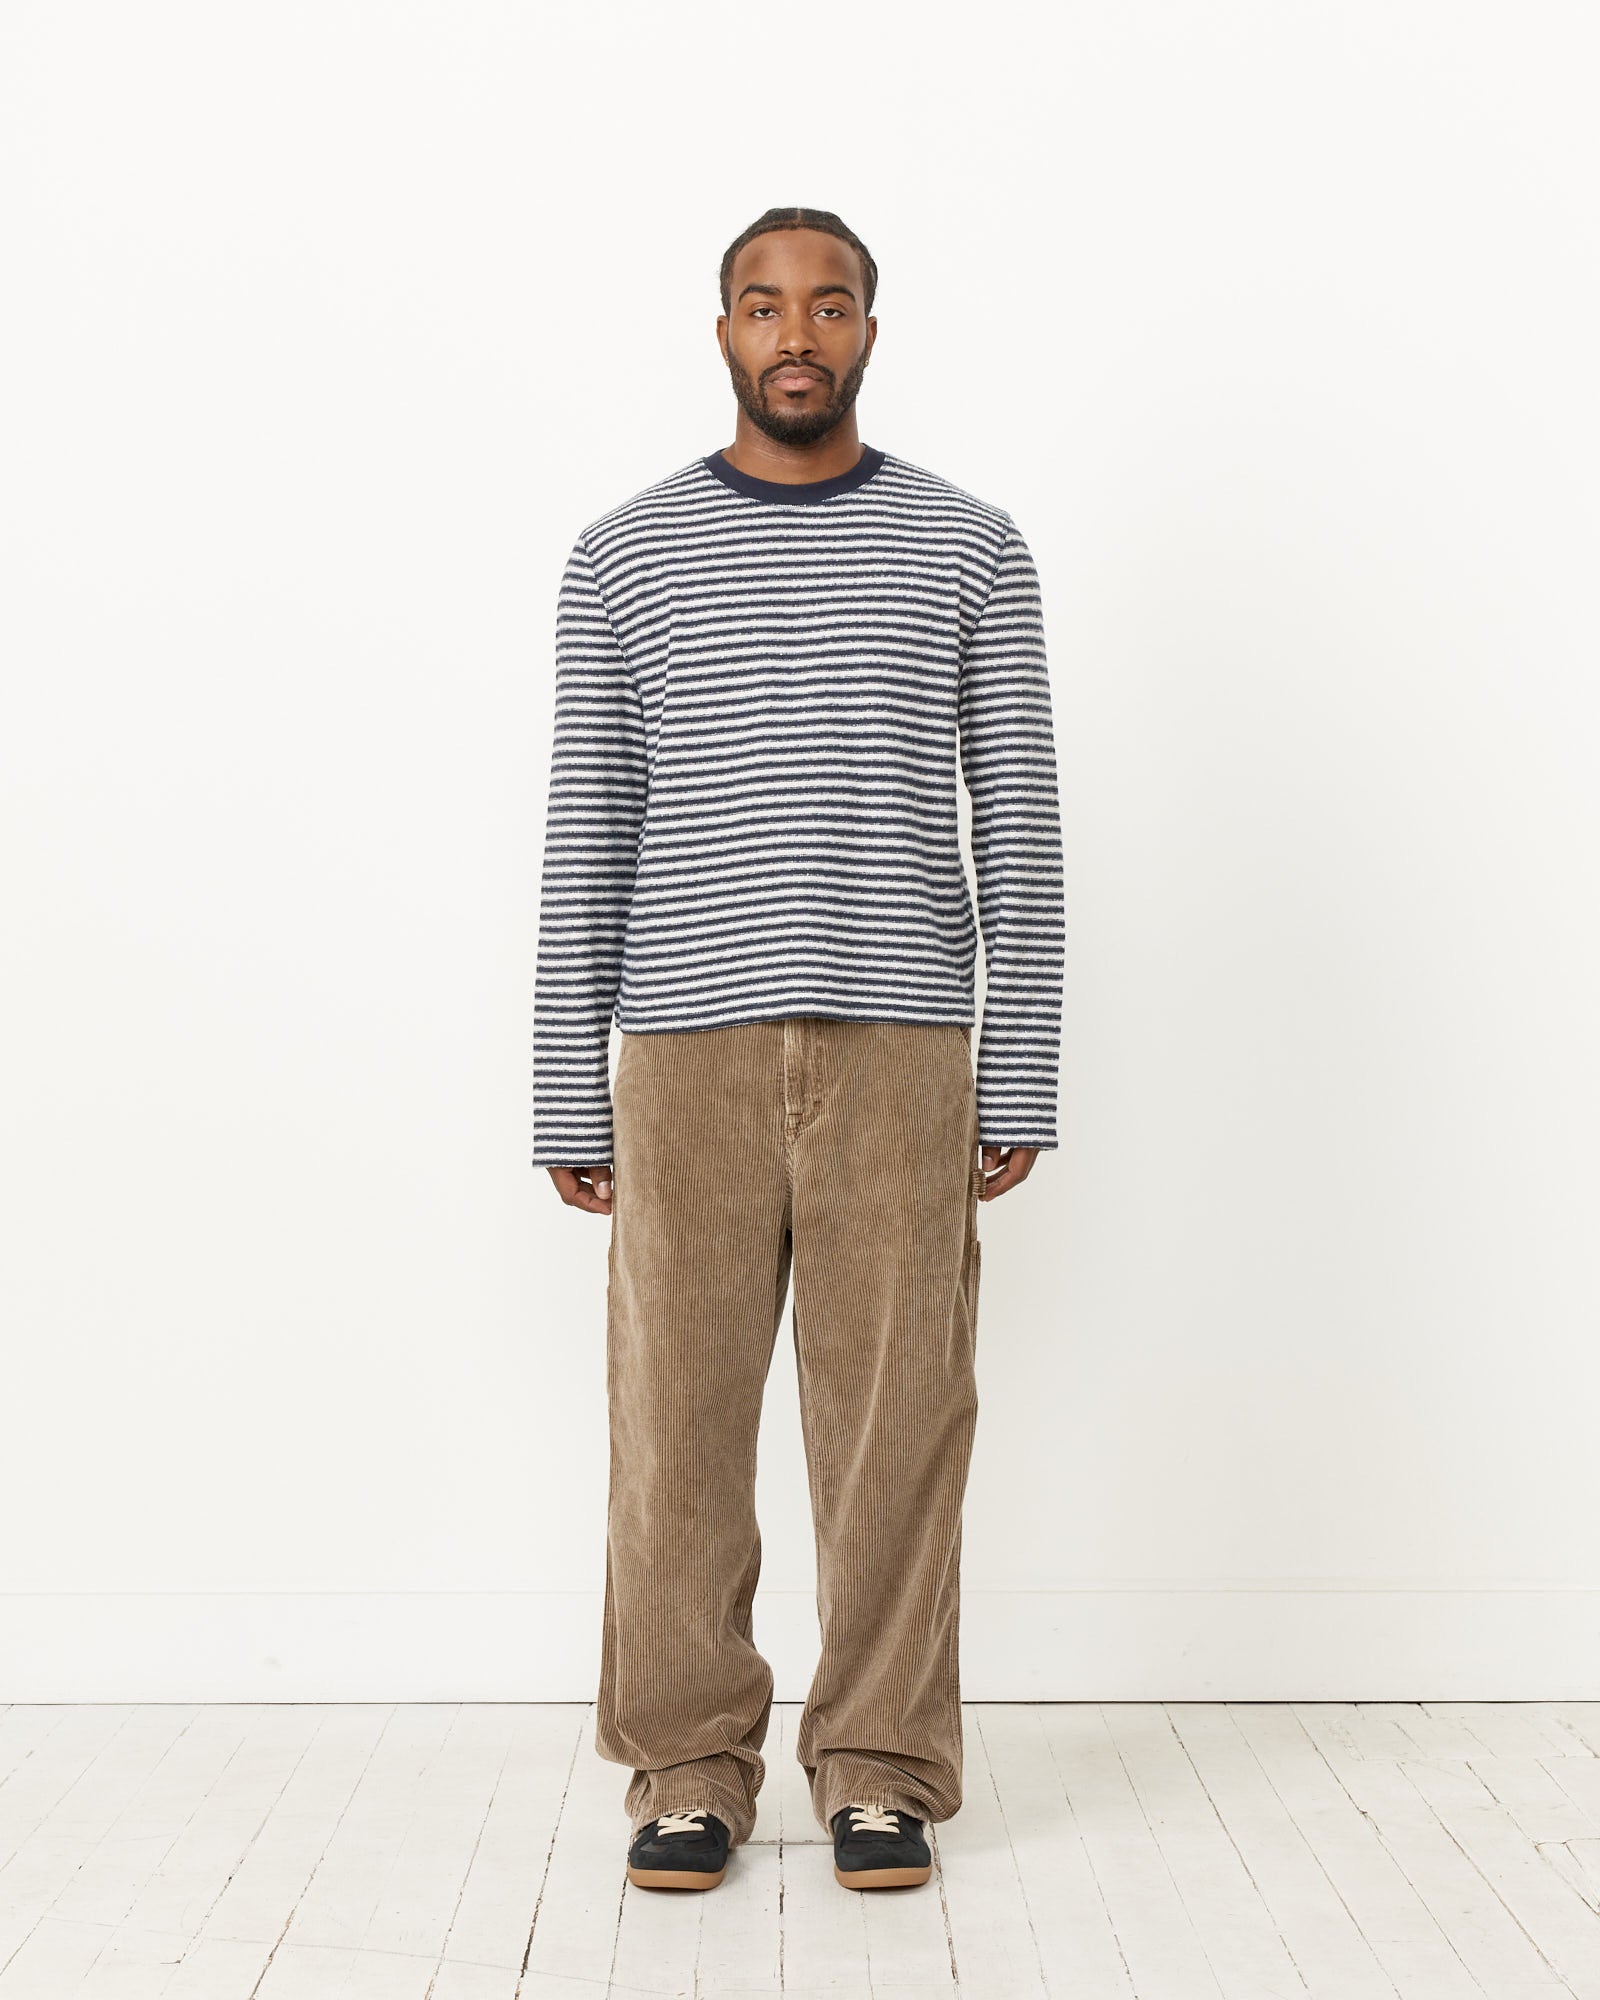 Our Legacy Artist Round Neck Knit Malaga Stripe Brushed Cotton